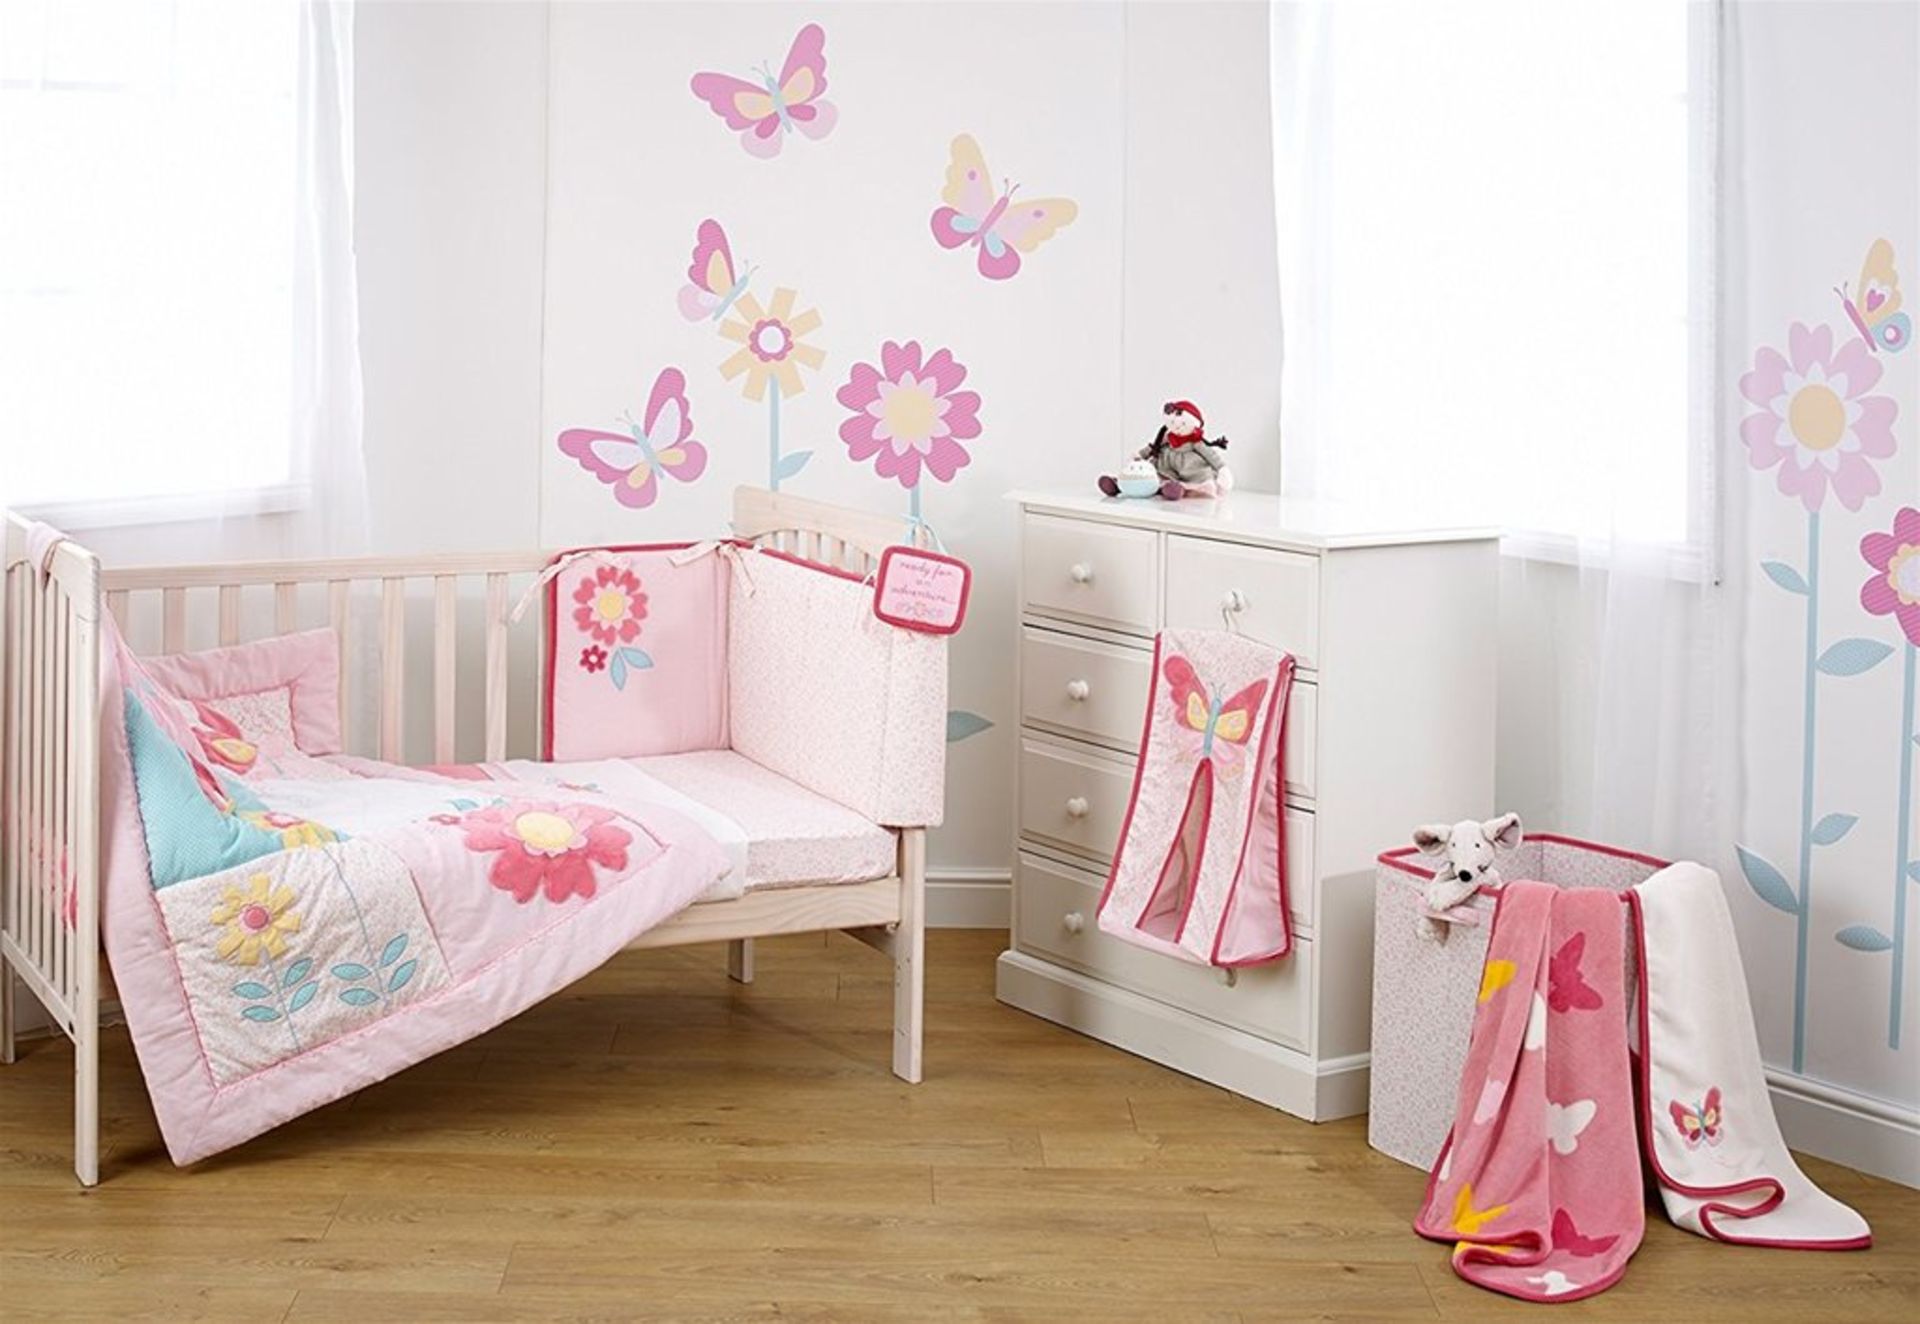 50 sets Beyond the Meadow Girls Nursery MakeOver Kit (Over 100 Wall Stickers to Decorate the Whole - Image 2 of 3